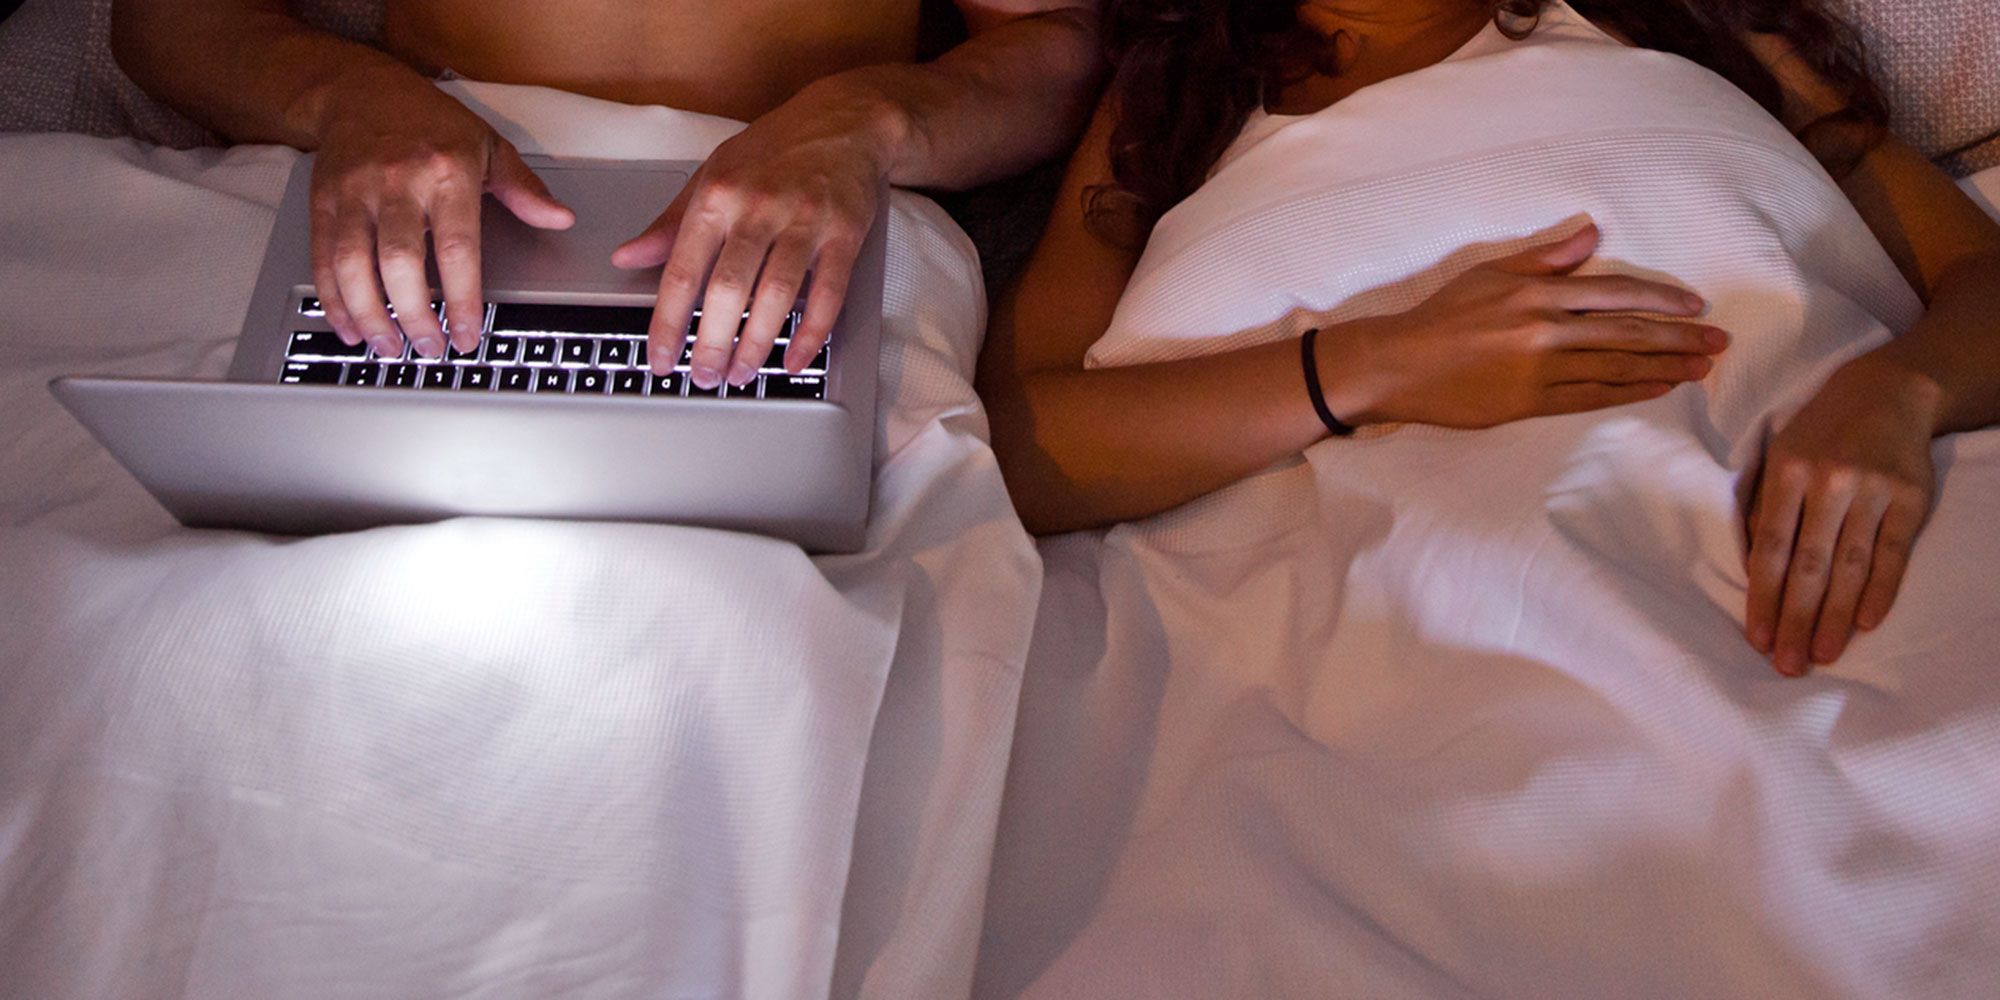 Watching porn together Why couples watch porn photo